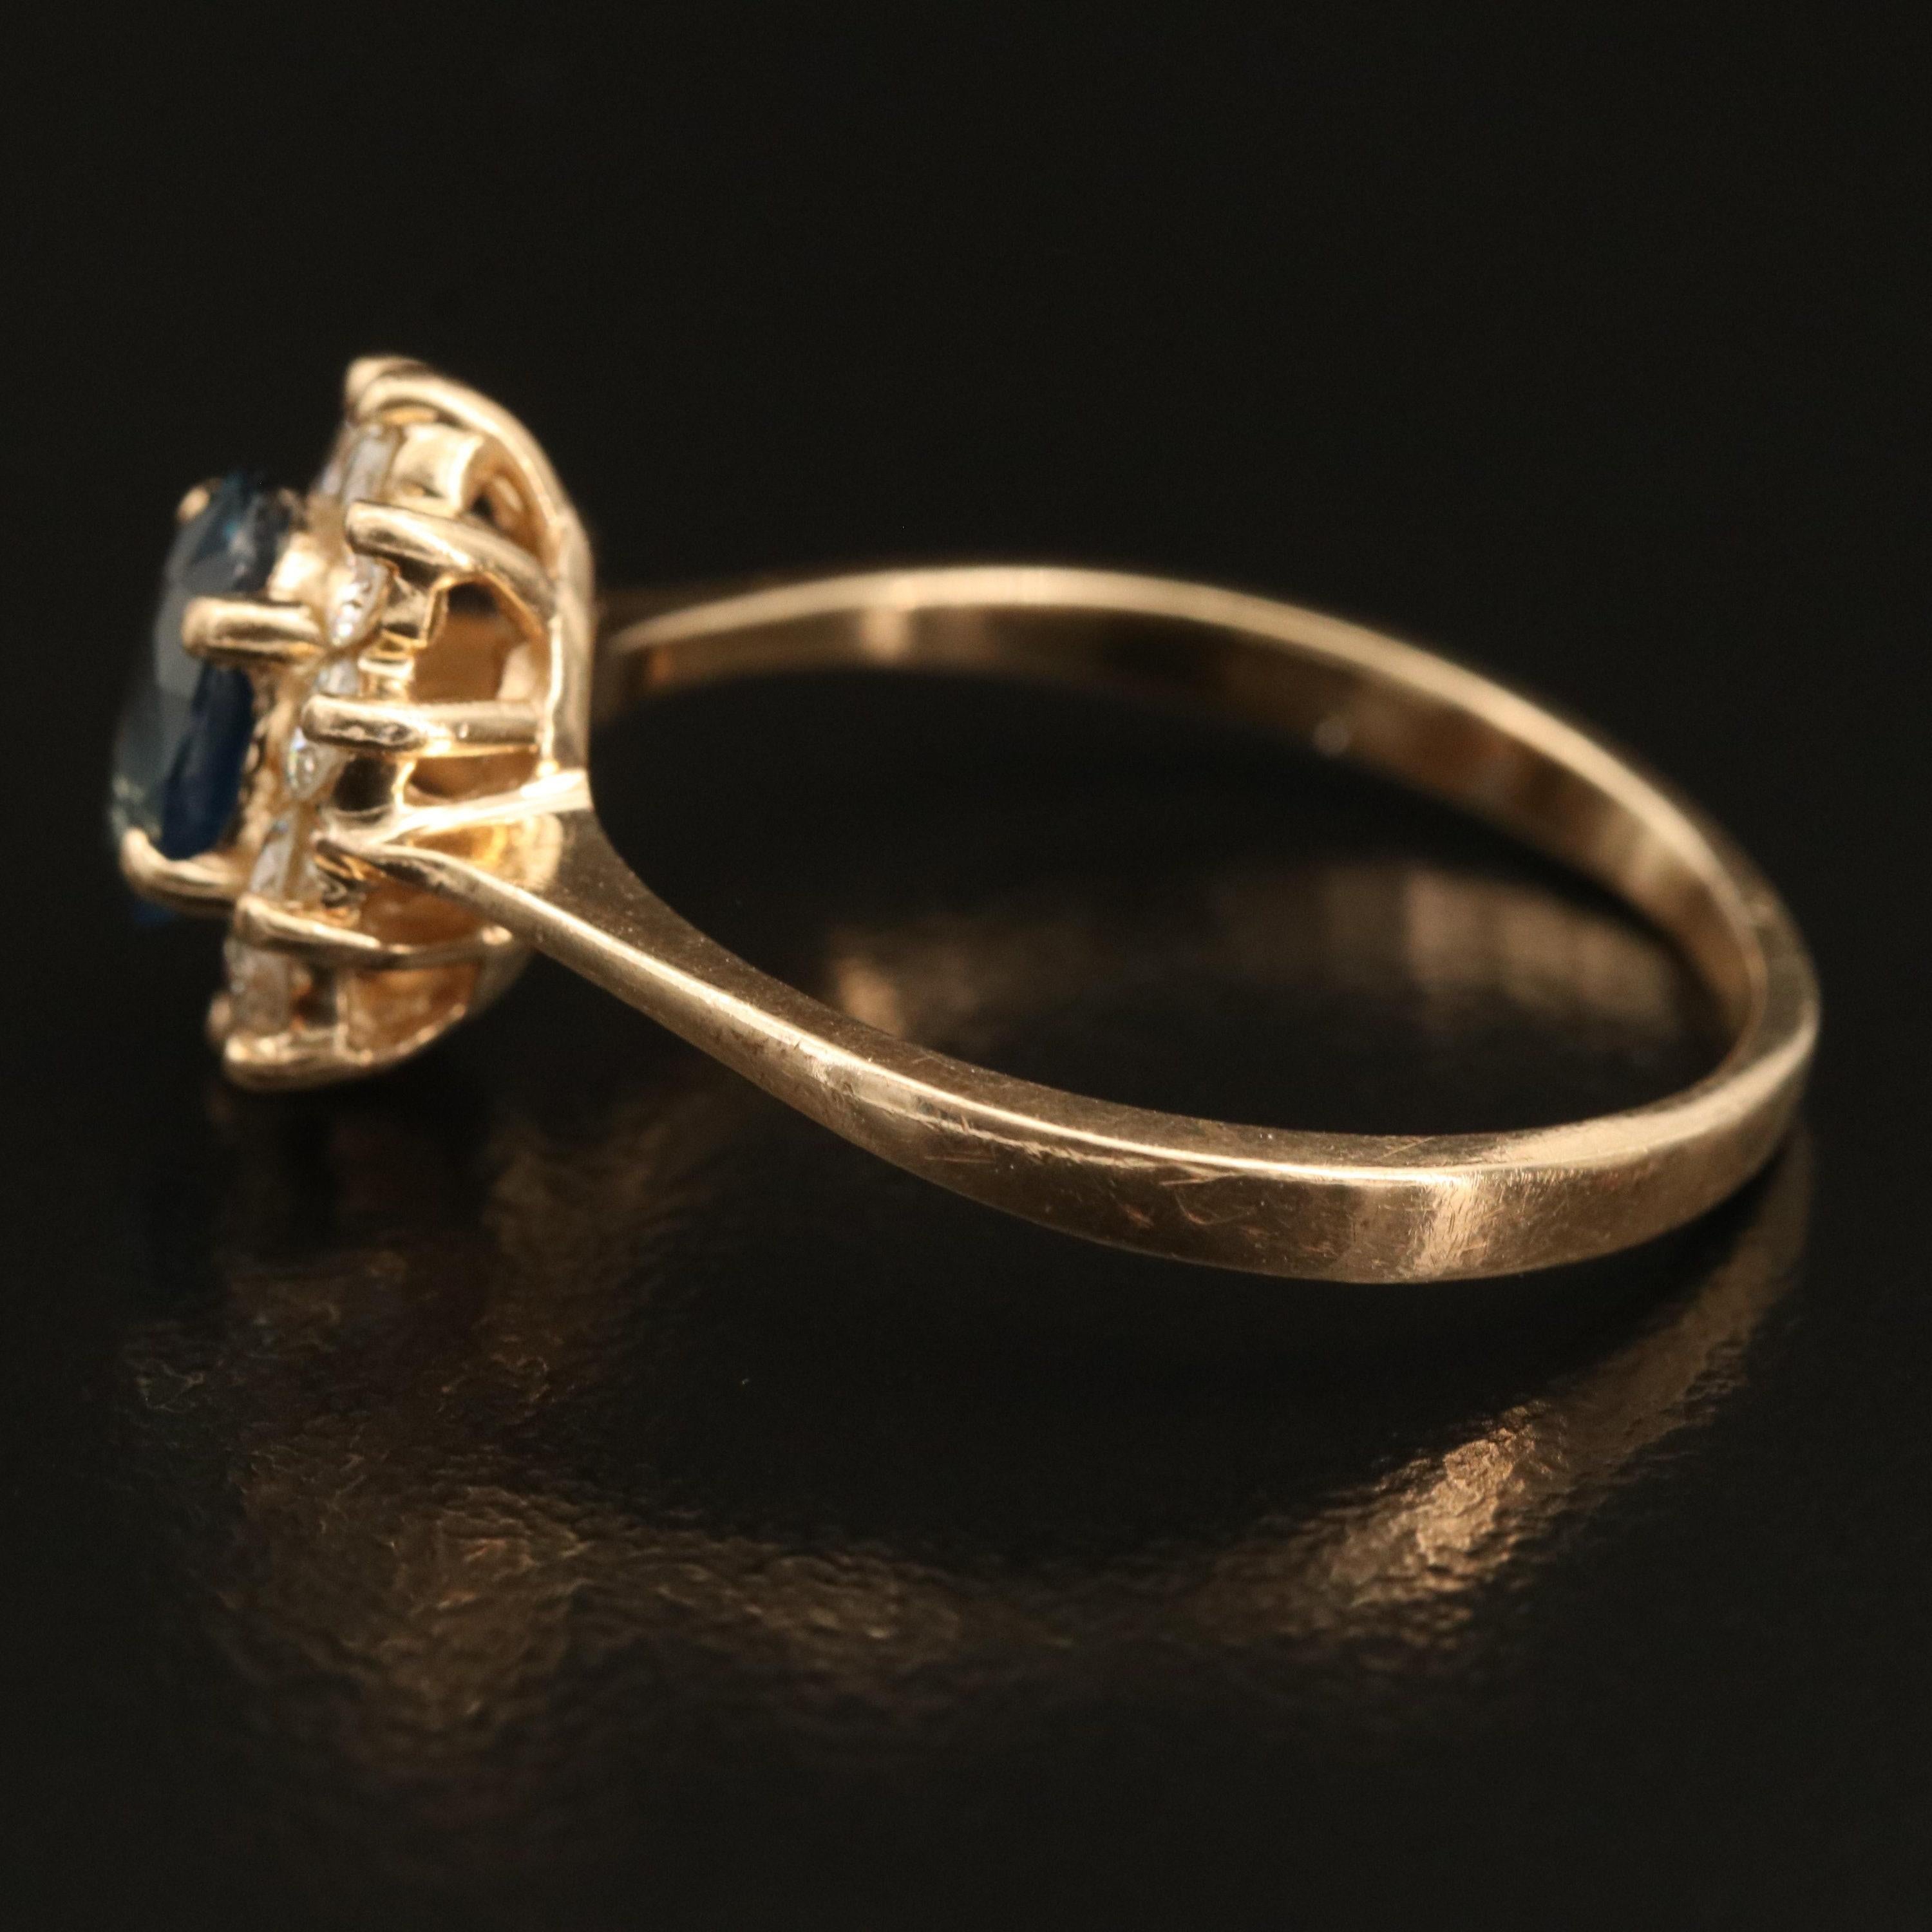 For Sale:  Unique Natural Sapphire Diamond Engagement Ring Set in 18K Gold, Cocktail Ring 4